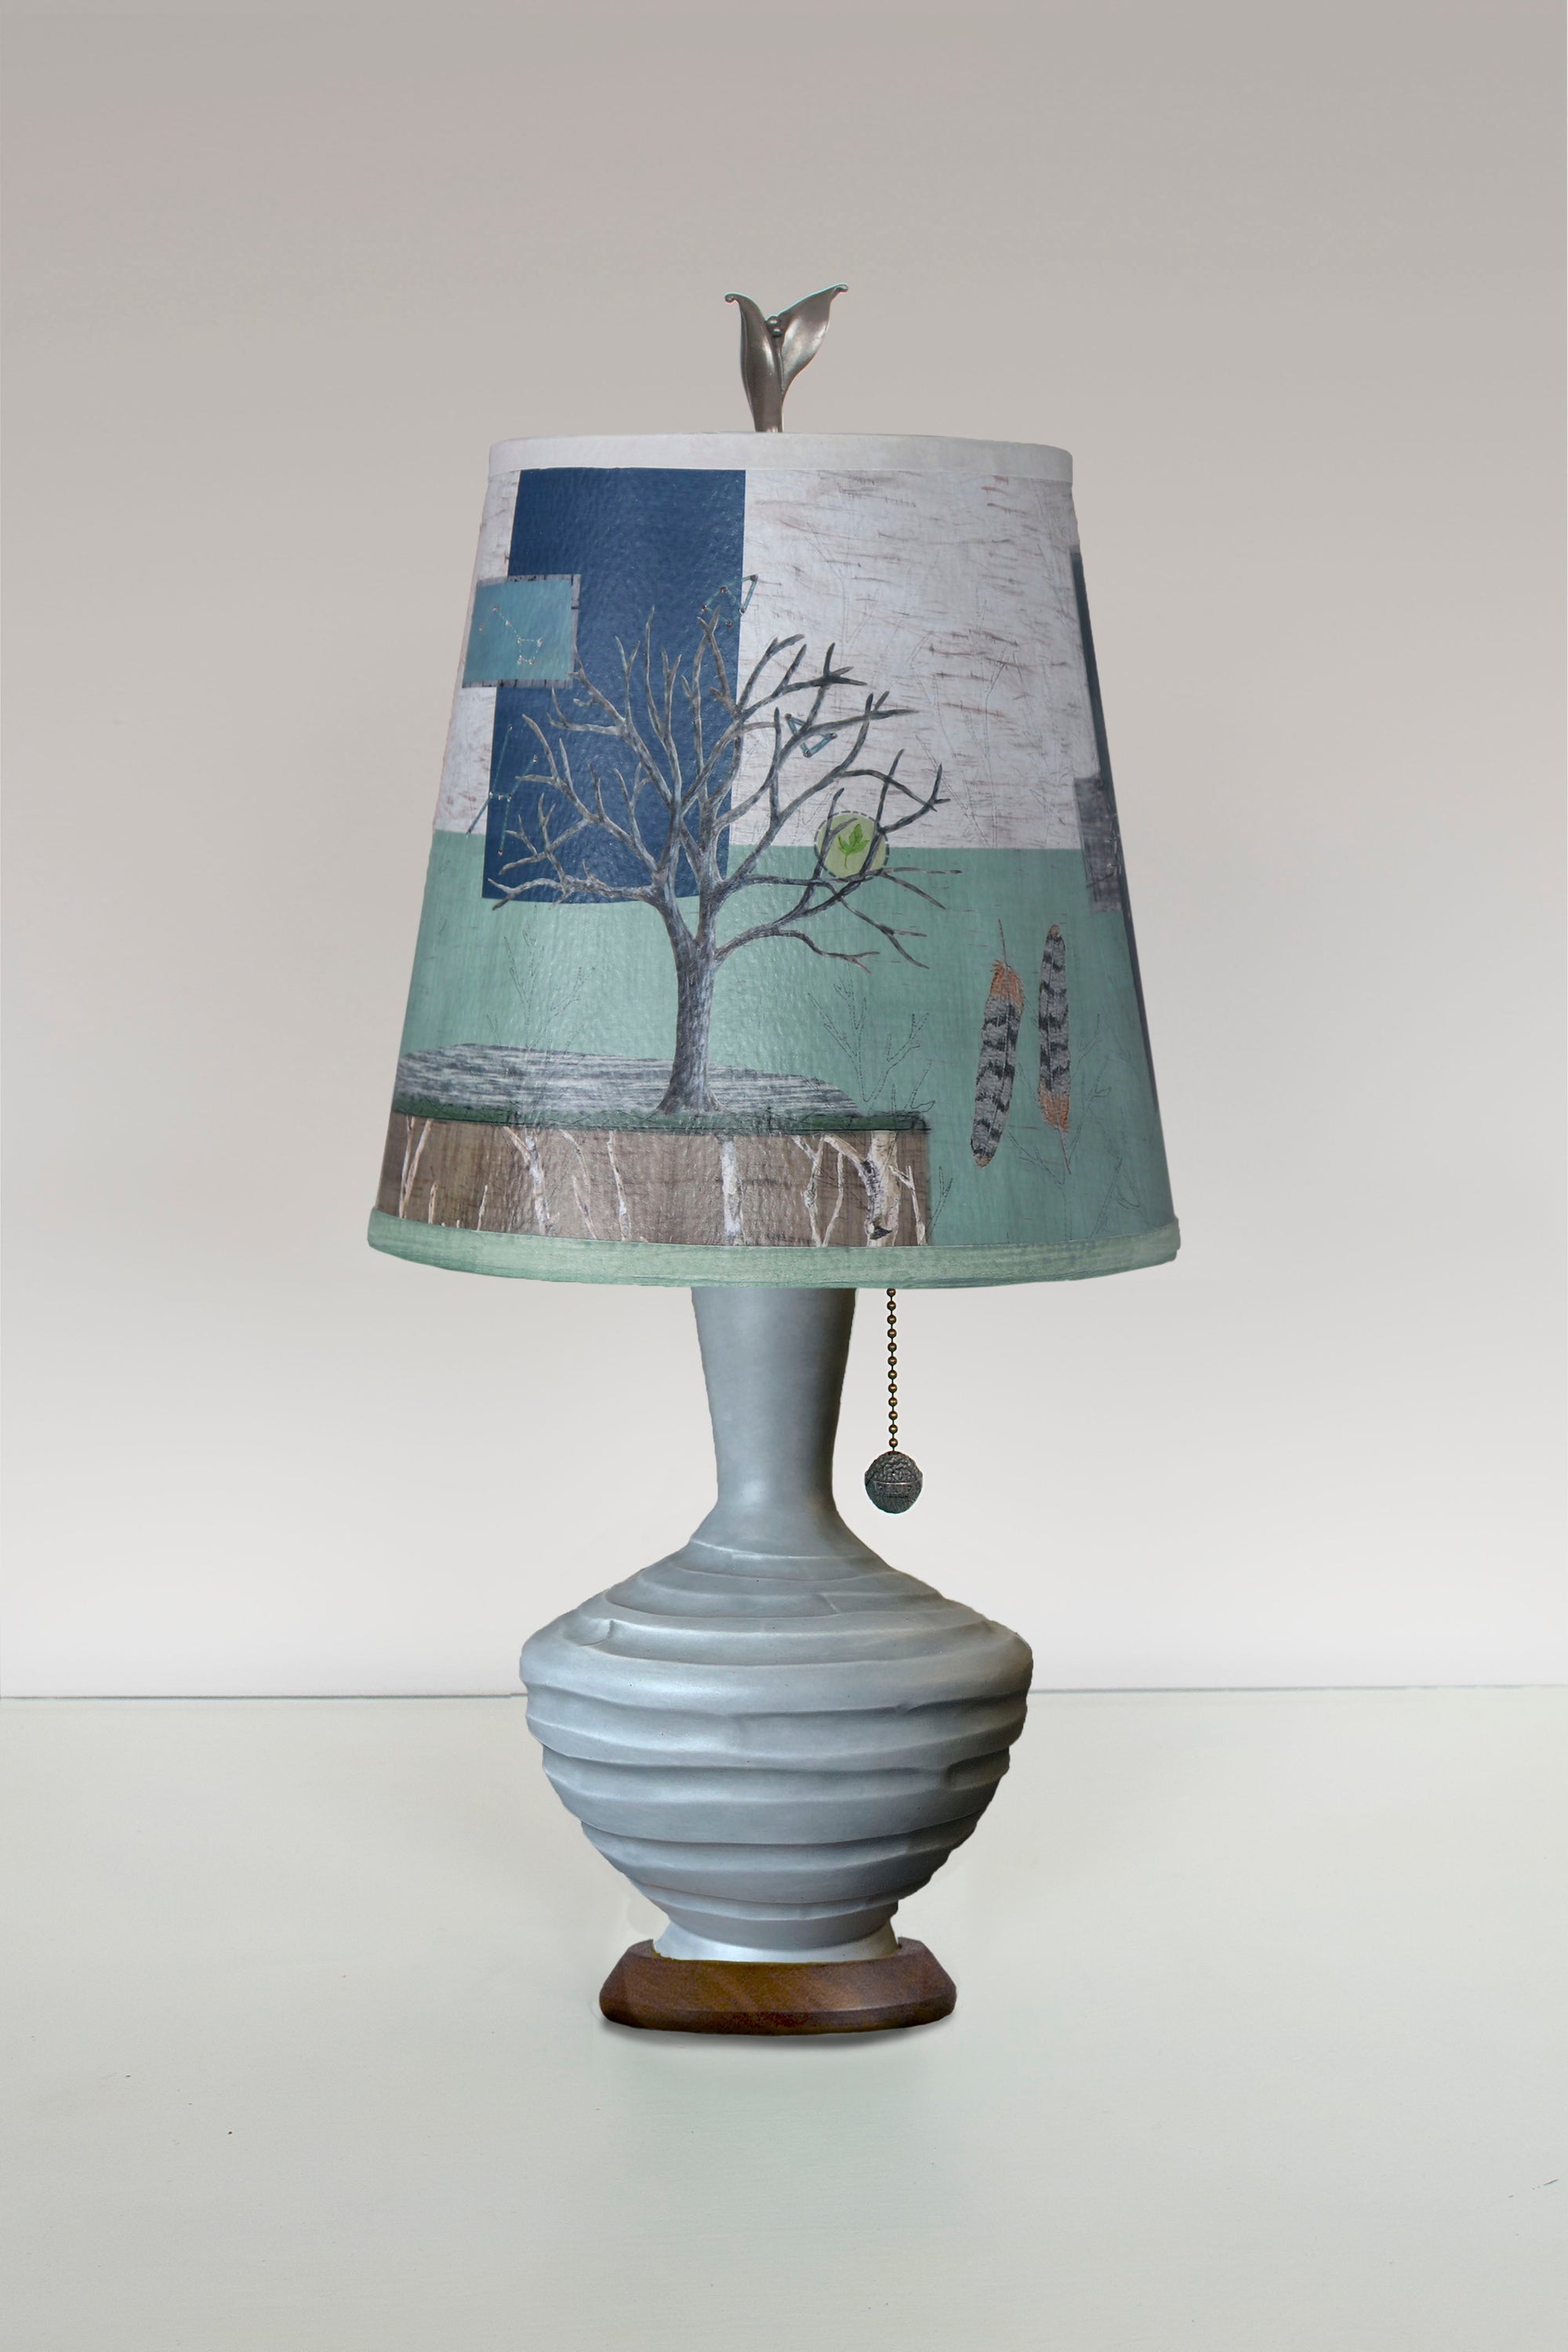 Janna Ugone & Co Table Lamps Ceramic Table Lamp with Small Drum Shade in Wander in Field